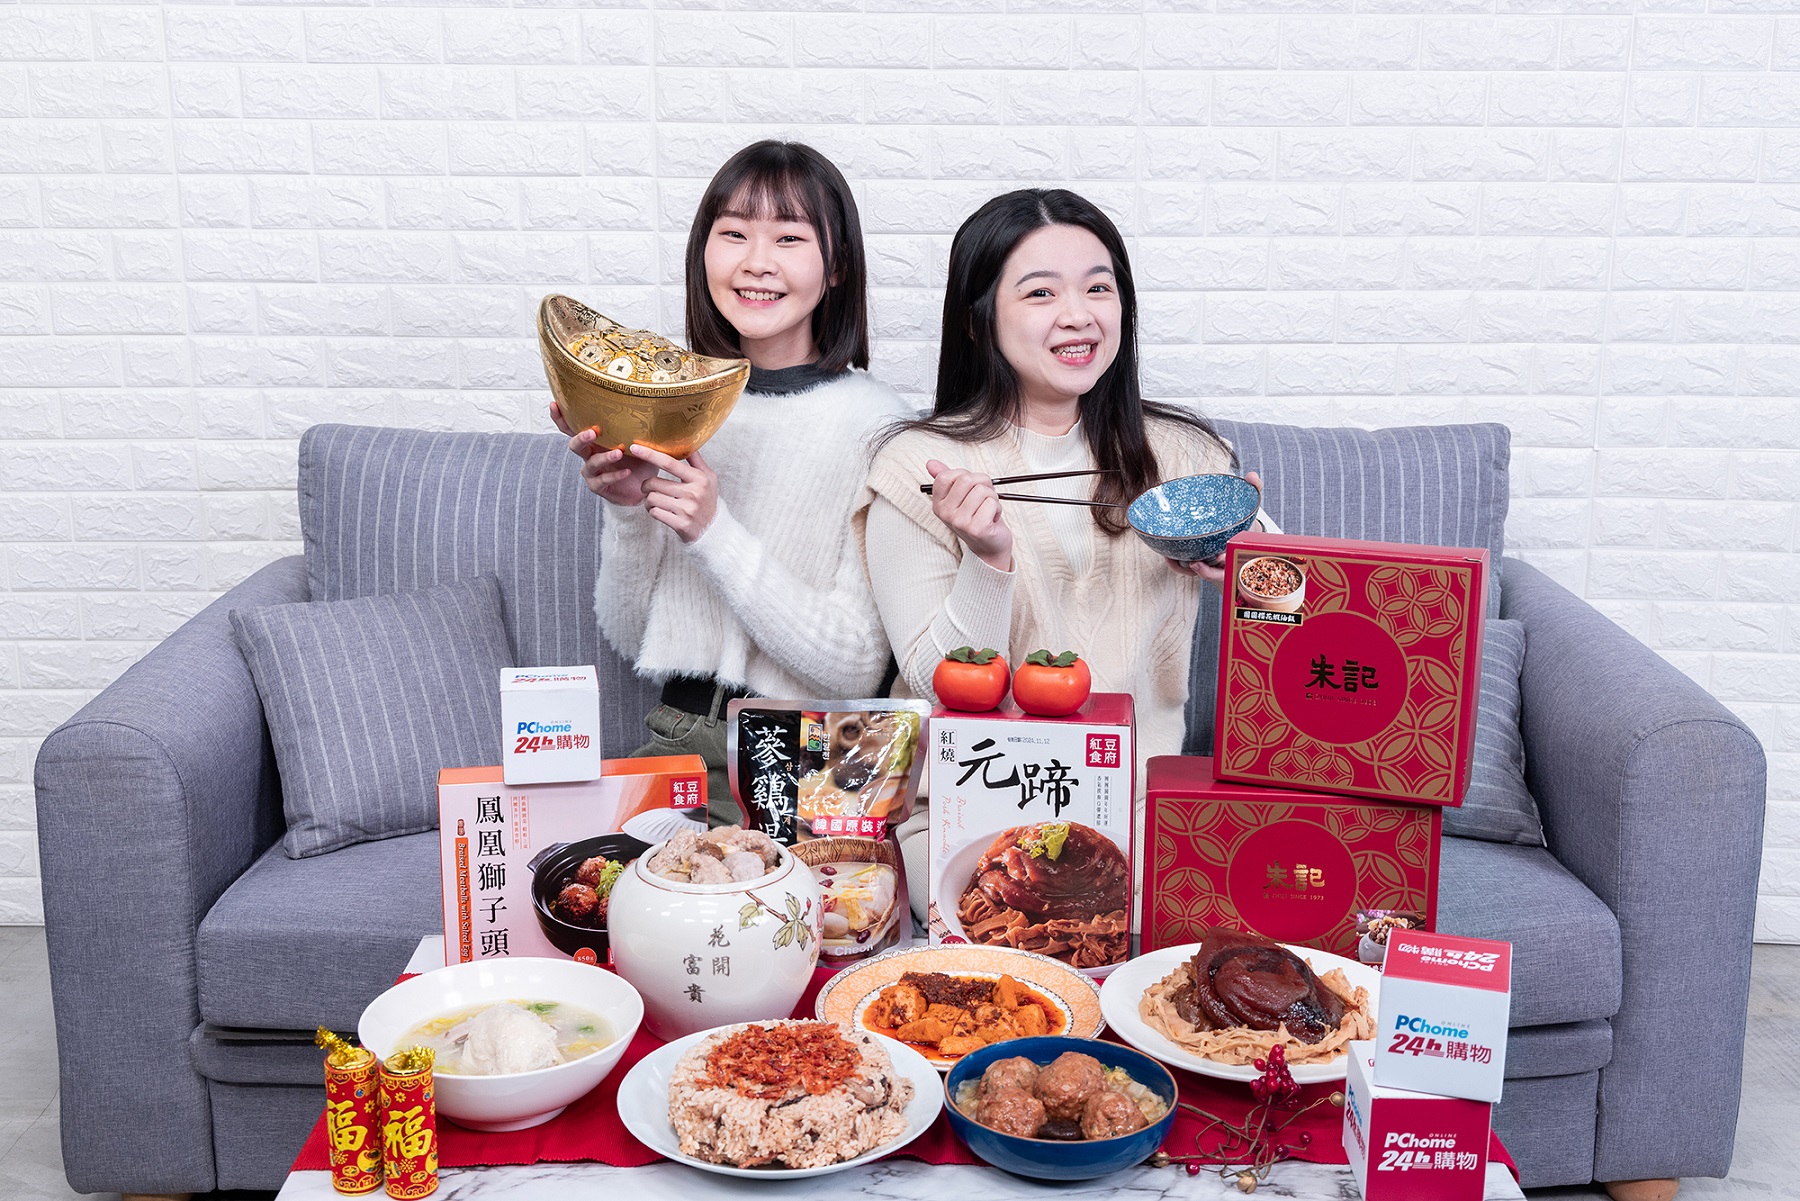 PChome 24h Shopping Kicks Off the "Chinese New Year Food Festival"; The Pre-Order Sales of Frozen Food See Nearly 30% MoM Increase, with Four-Course and Six-Course Combos as the Bestsellers